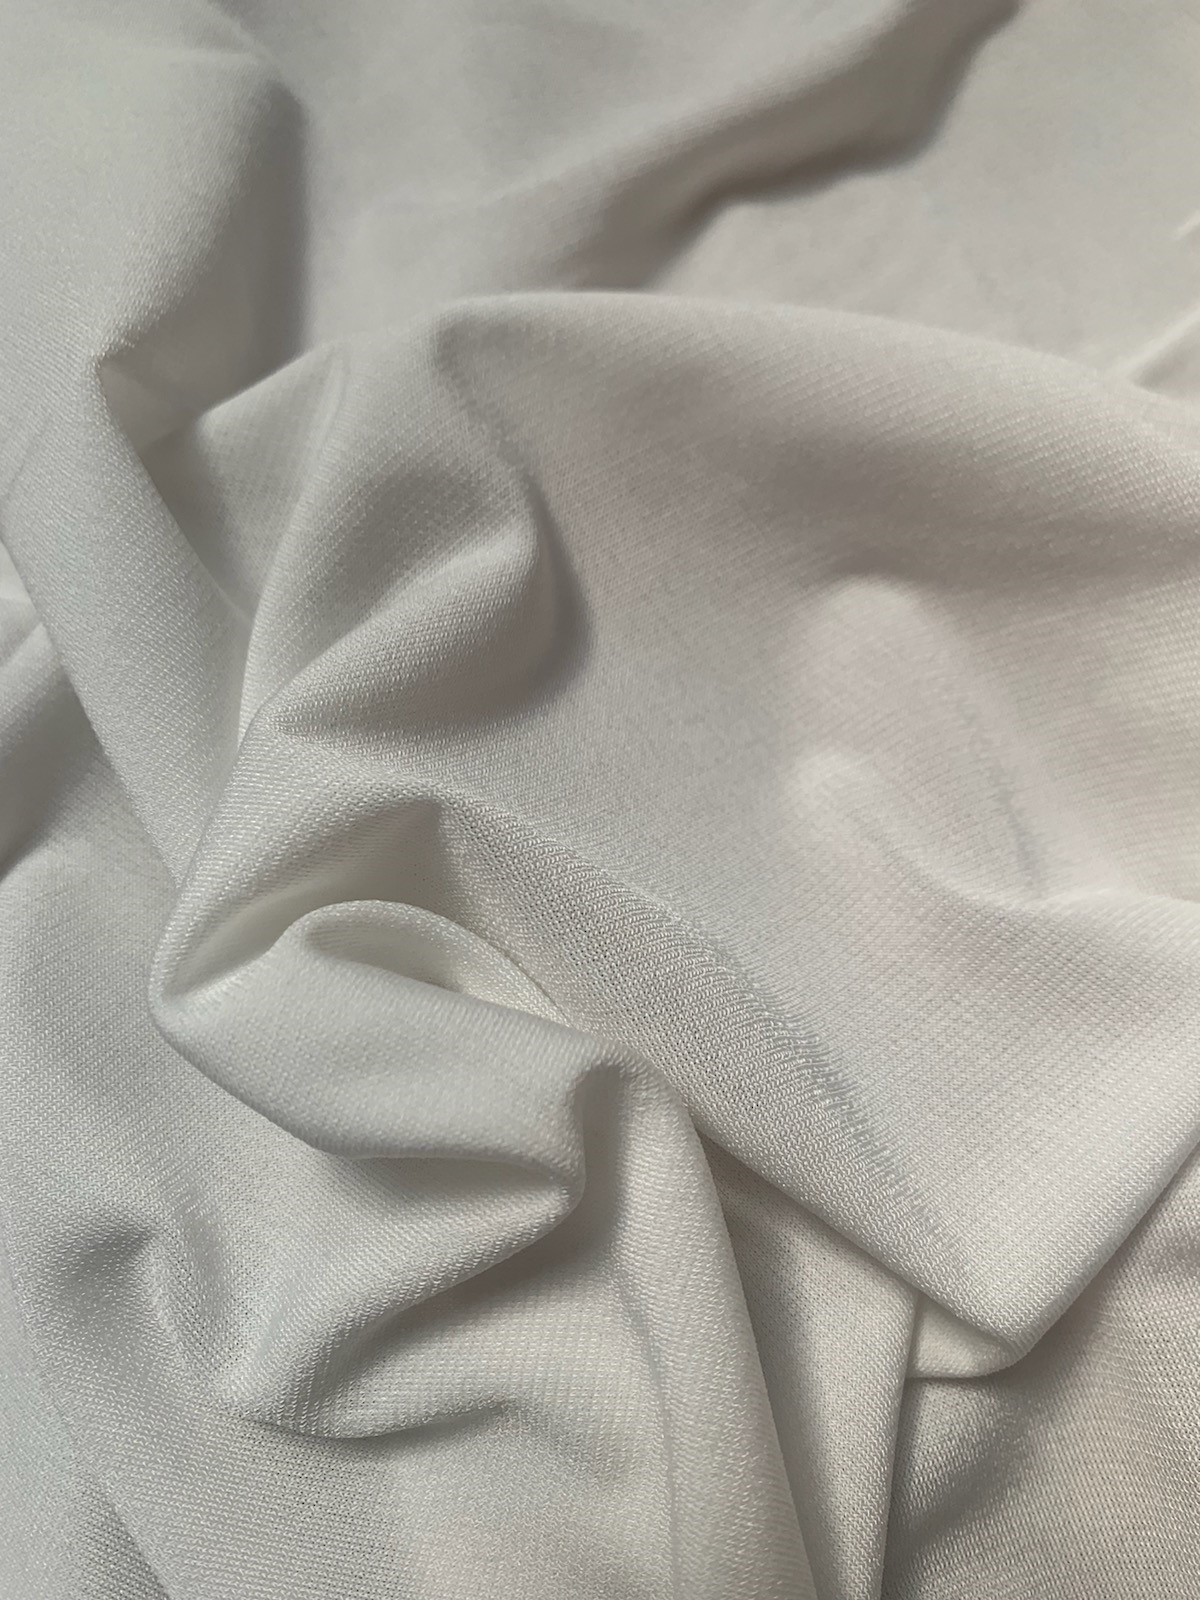 58/60" Ivory ITY Knit Jersey Fabric By The Yard